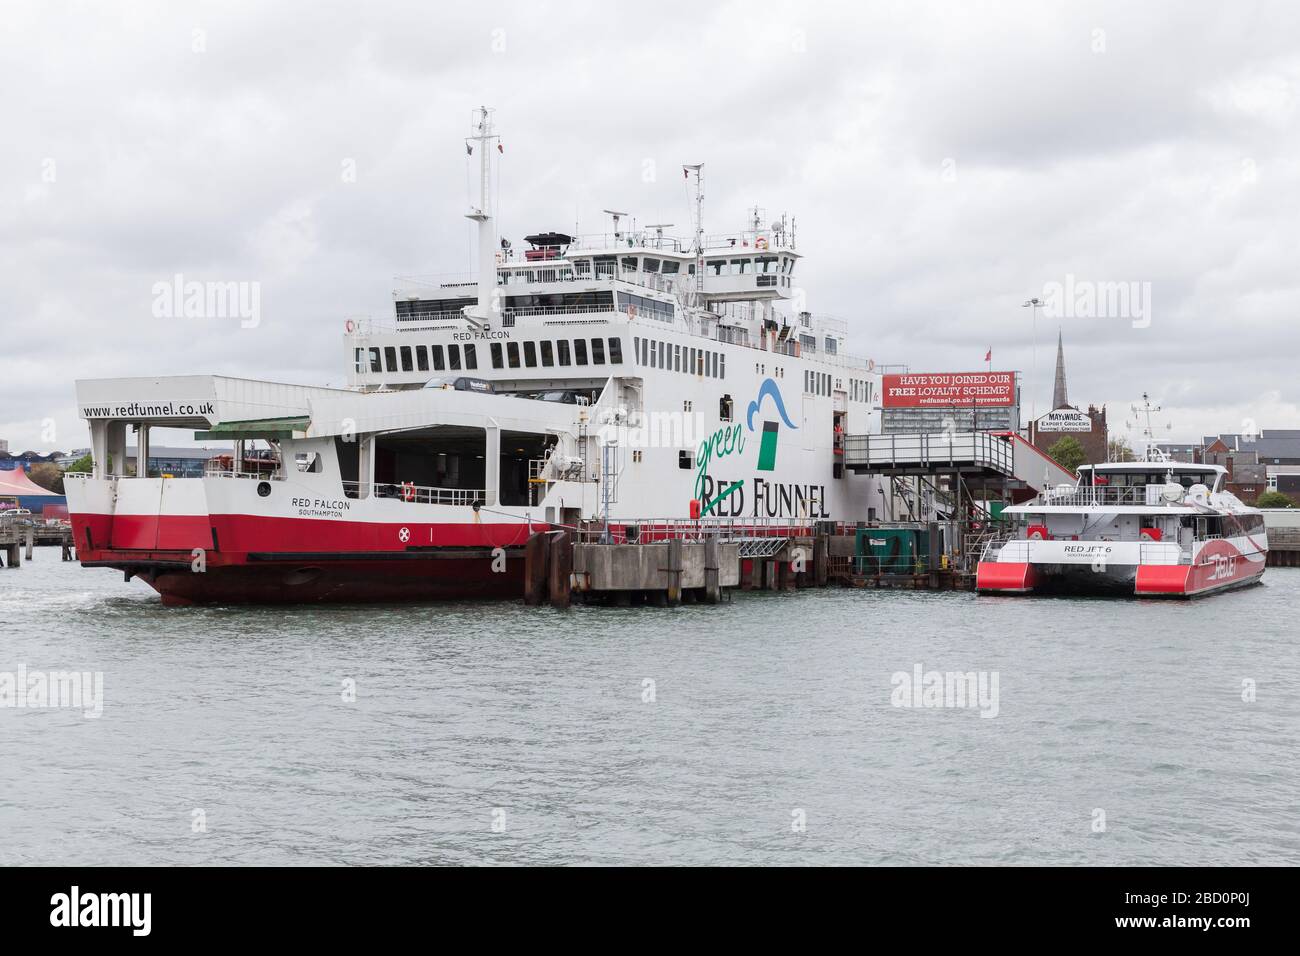 Southampton, United Kingdom - April 24, 2019: Passenger ferries moored in the port of Southampton. Red Funnel transportation company fleet Stock Photo